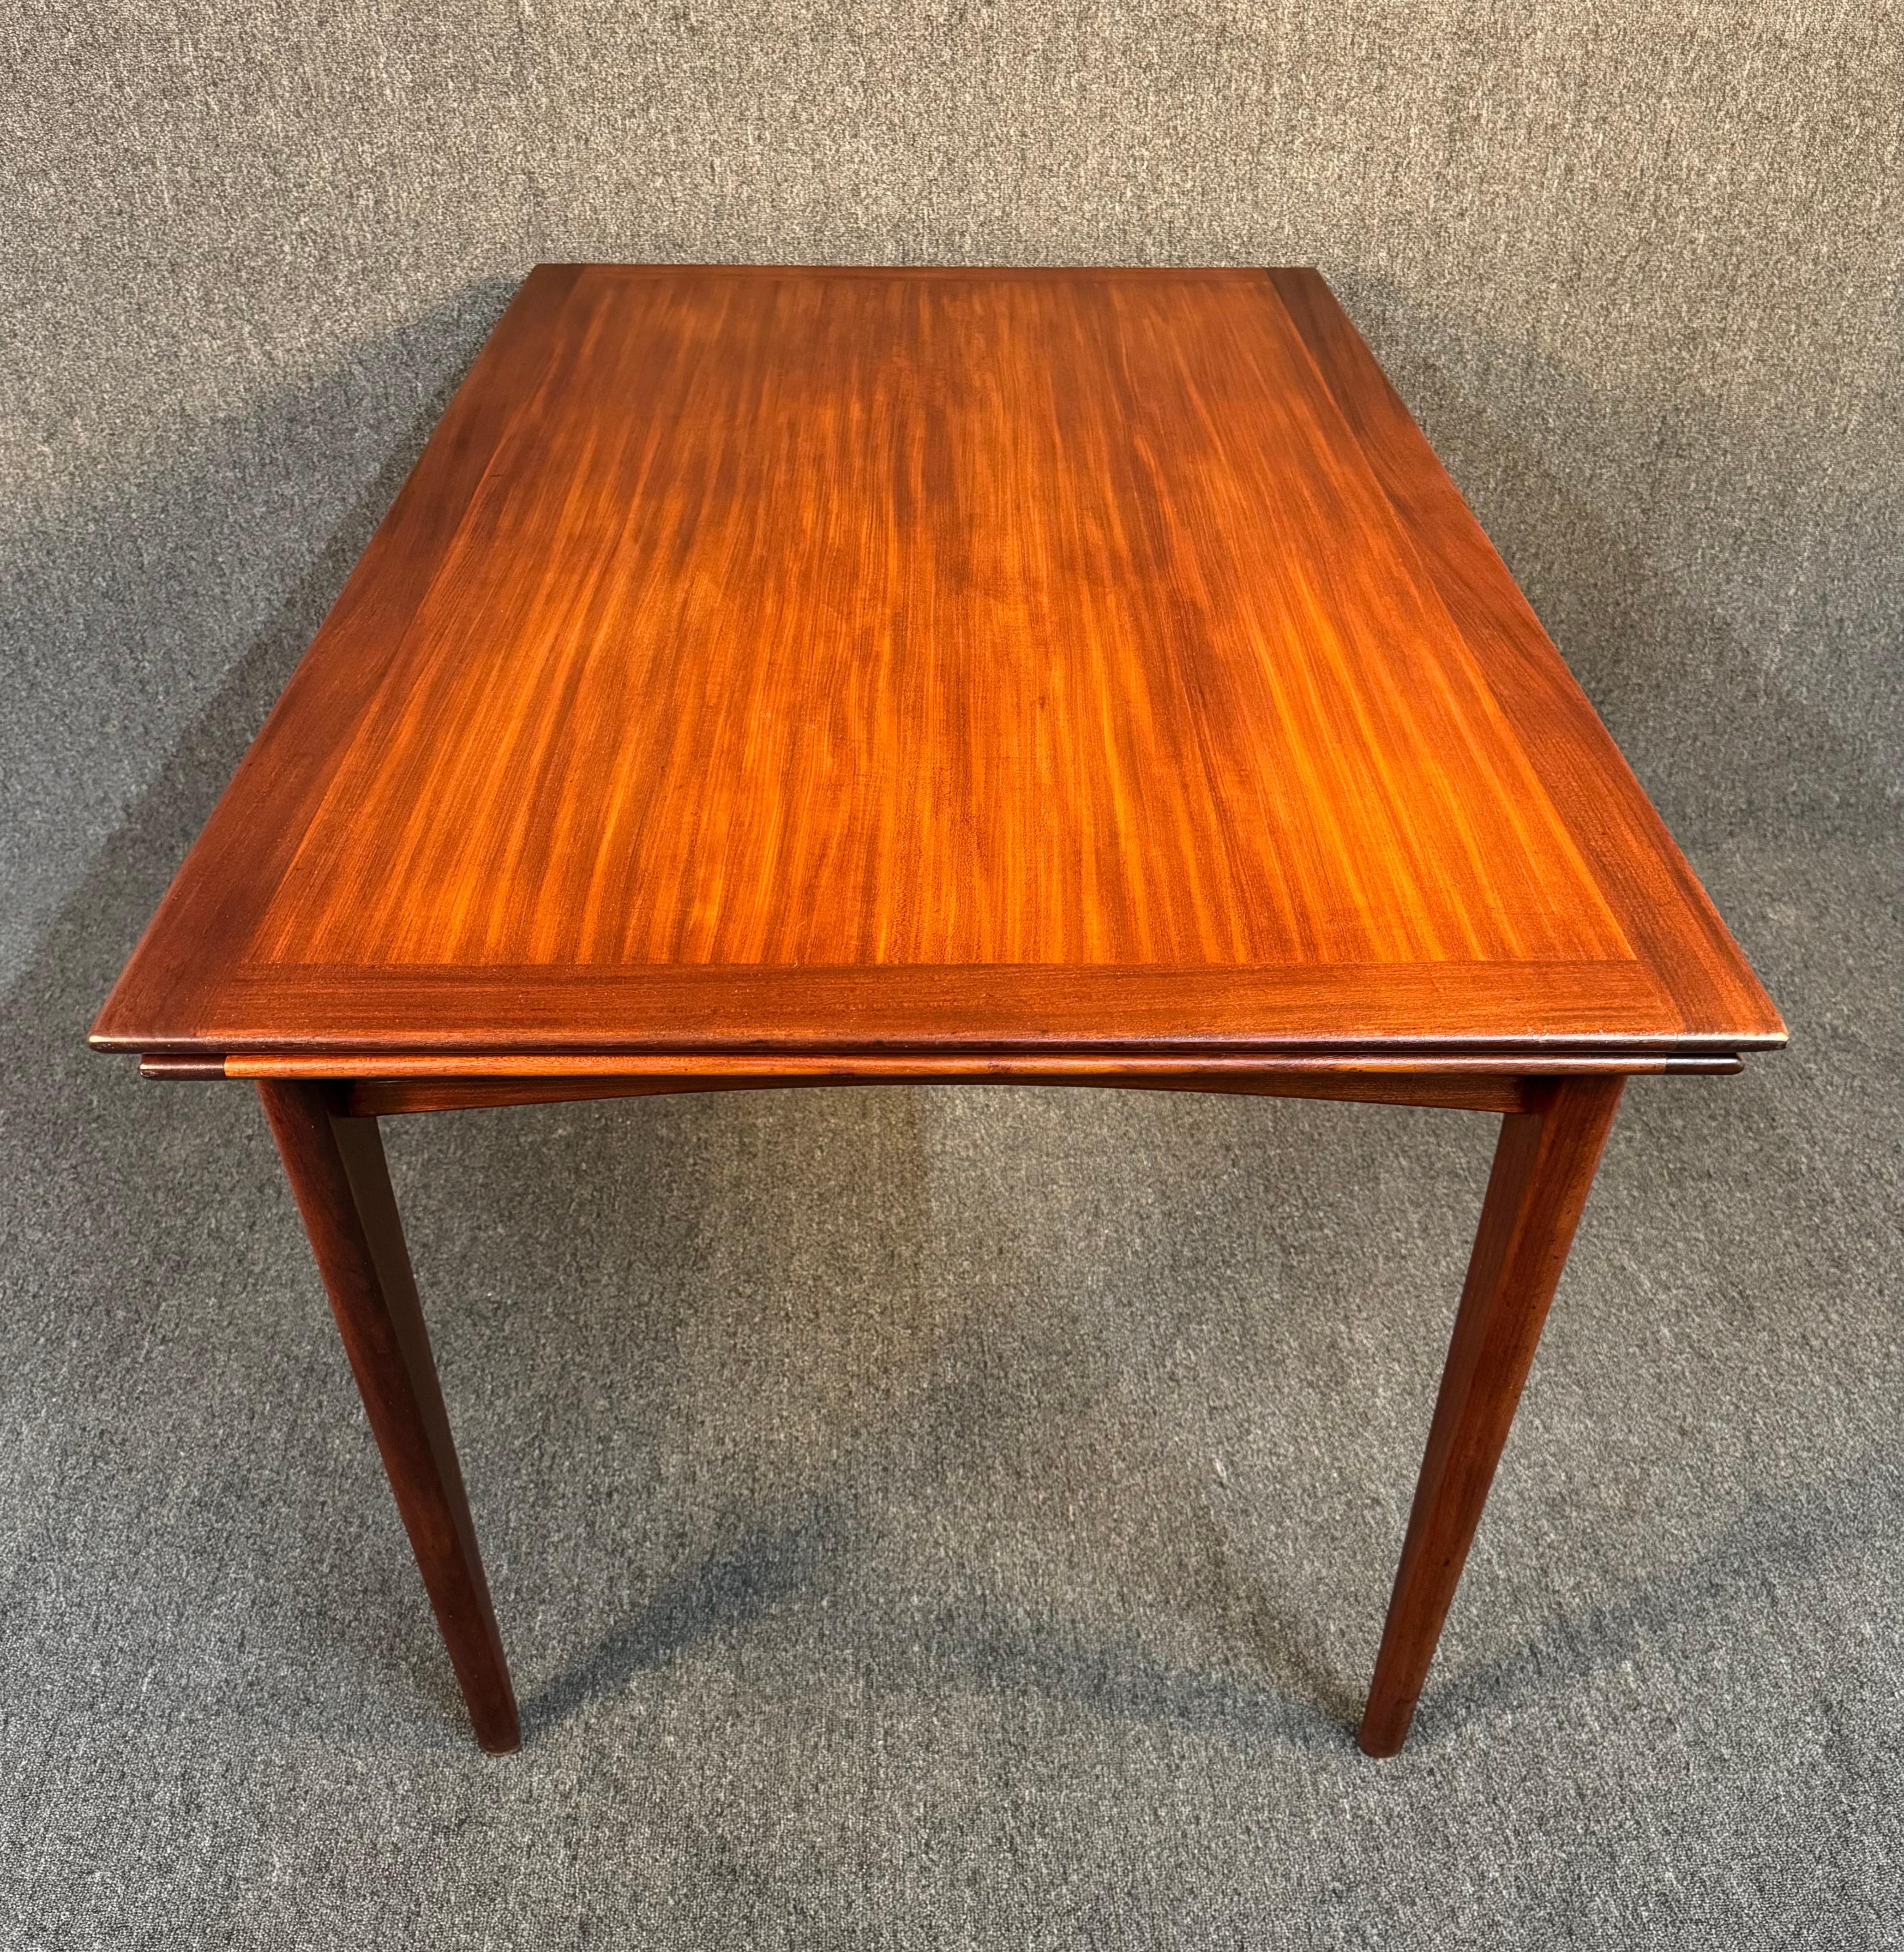 Mid-20th Century Vintage British Mid Century Modern Afromasia Teak Dining Table by A. Younger Ltd For Sale